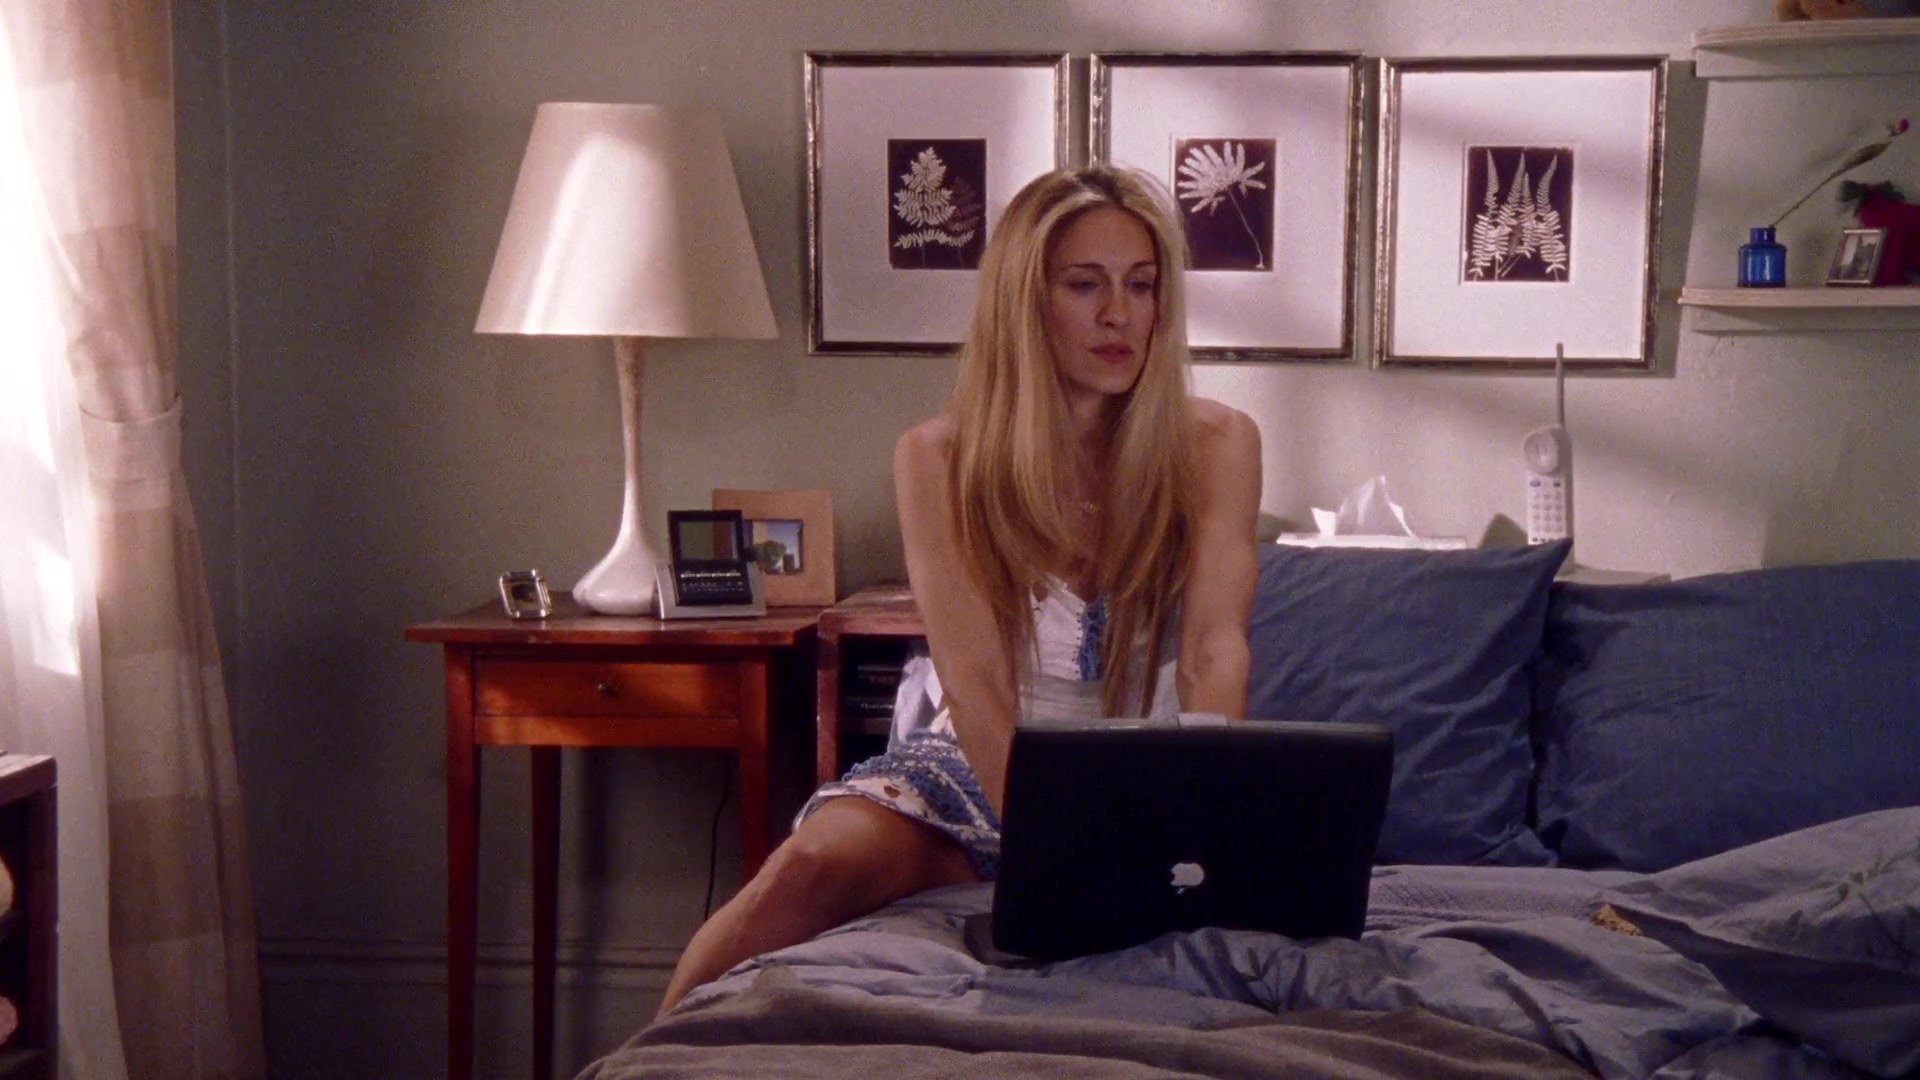 Apple Powerbook Black Notebook Used By Sarah Jessica Parker As Carrie